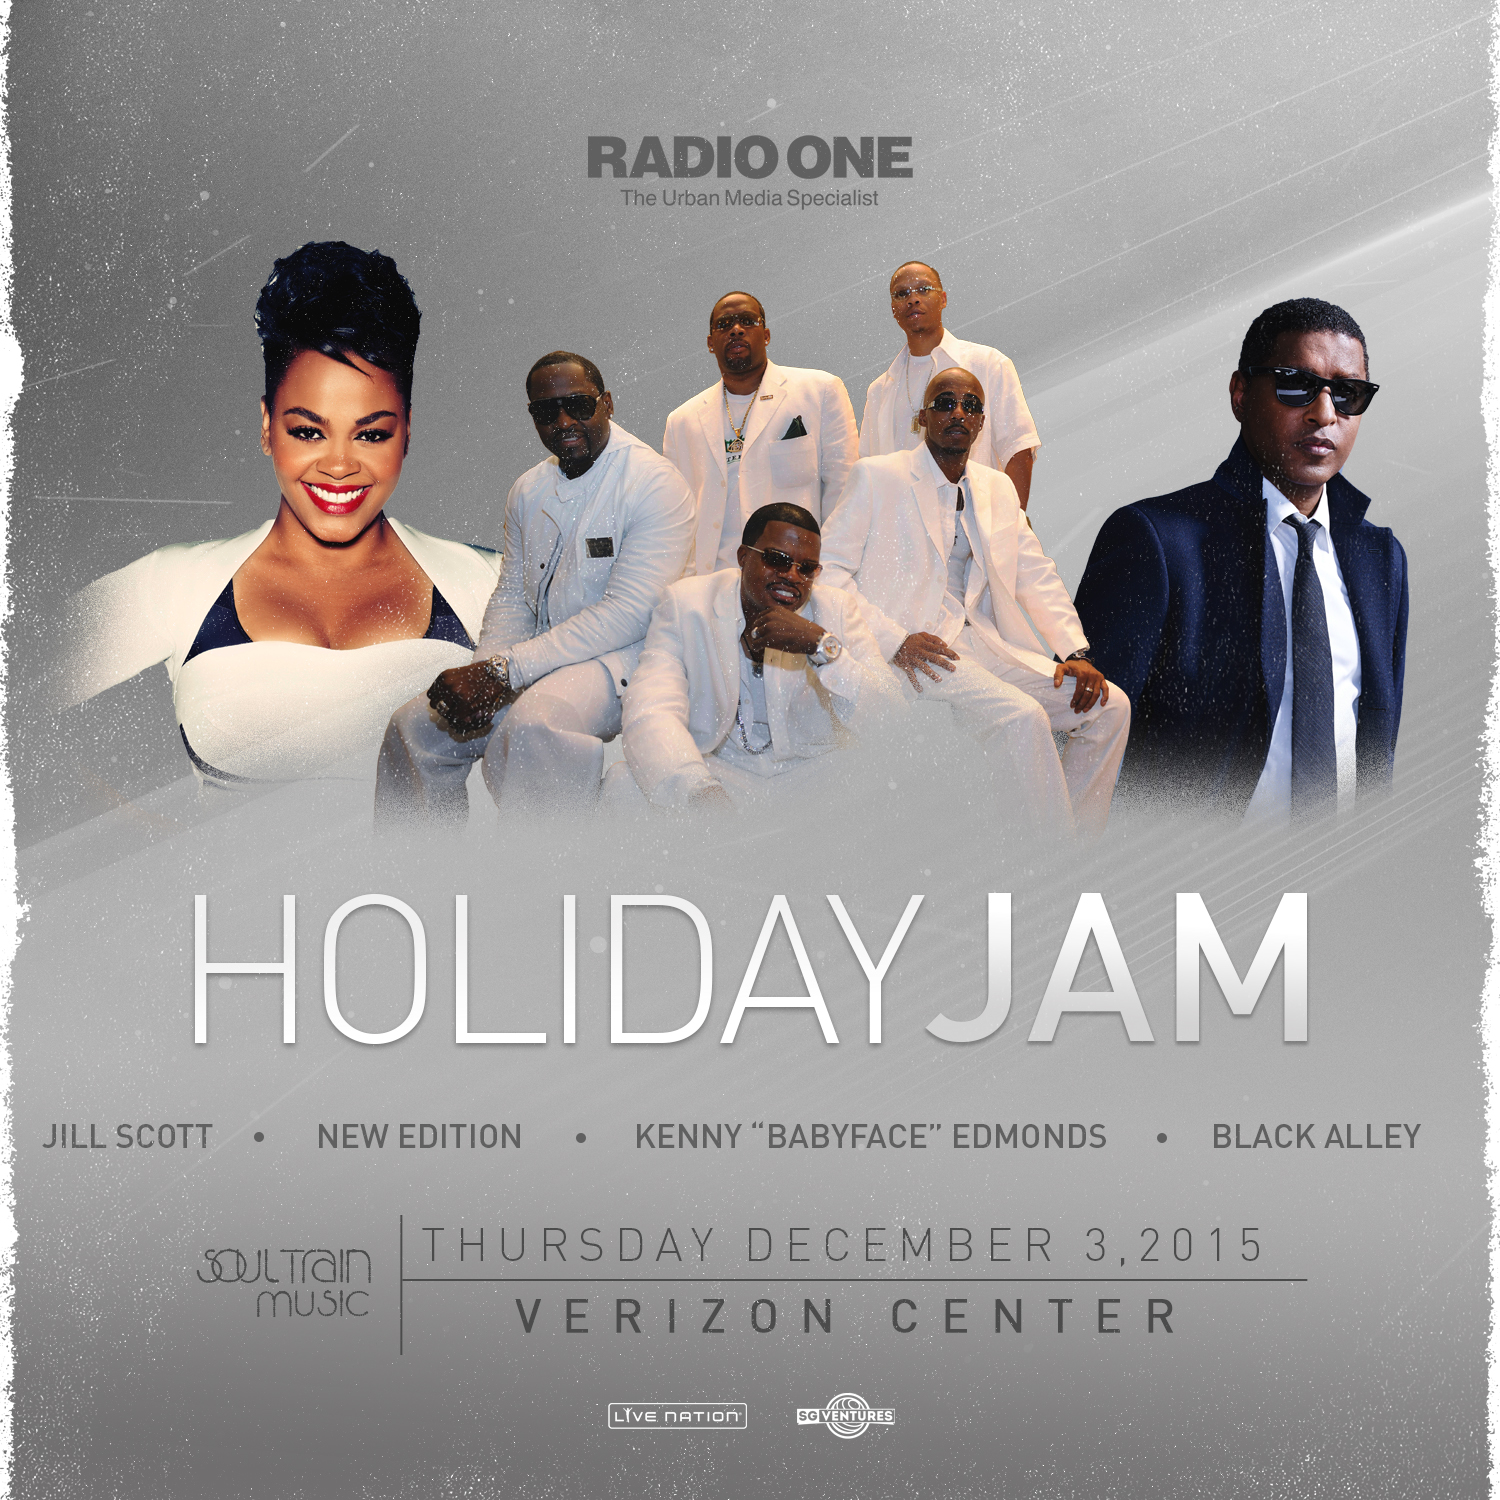 Radio One Presents Holiday Jam [Buy Tickets Here] 93.9 WKYS